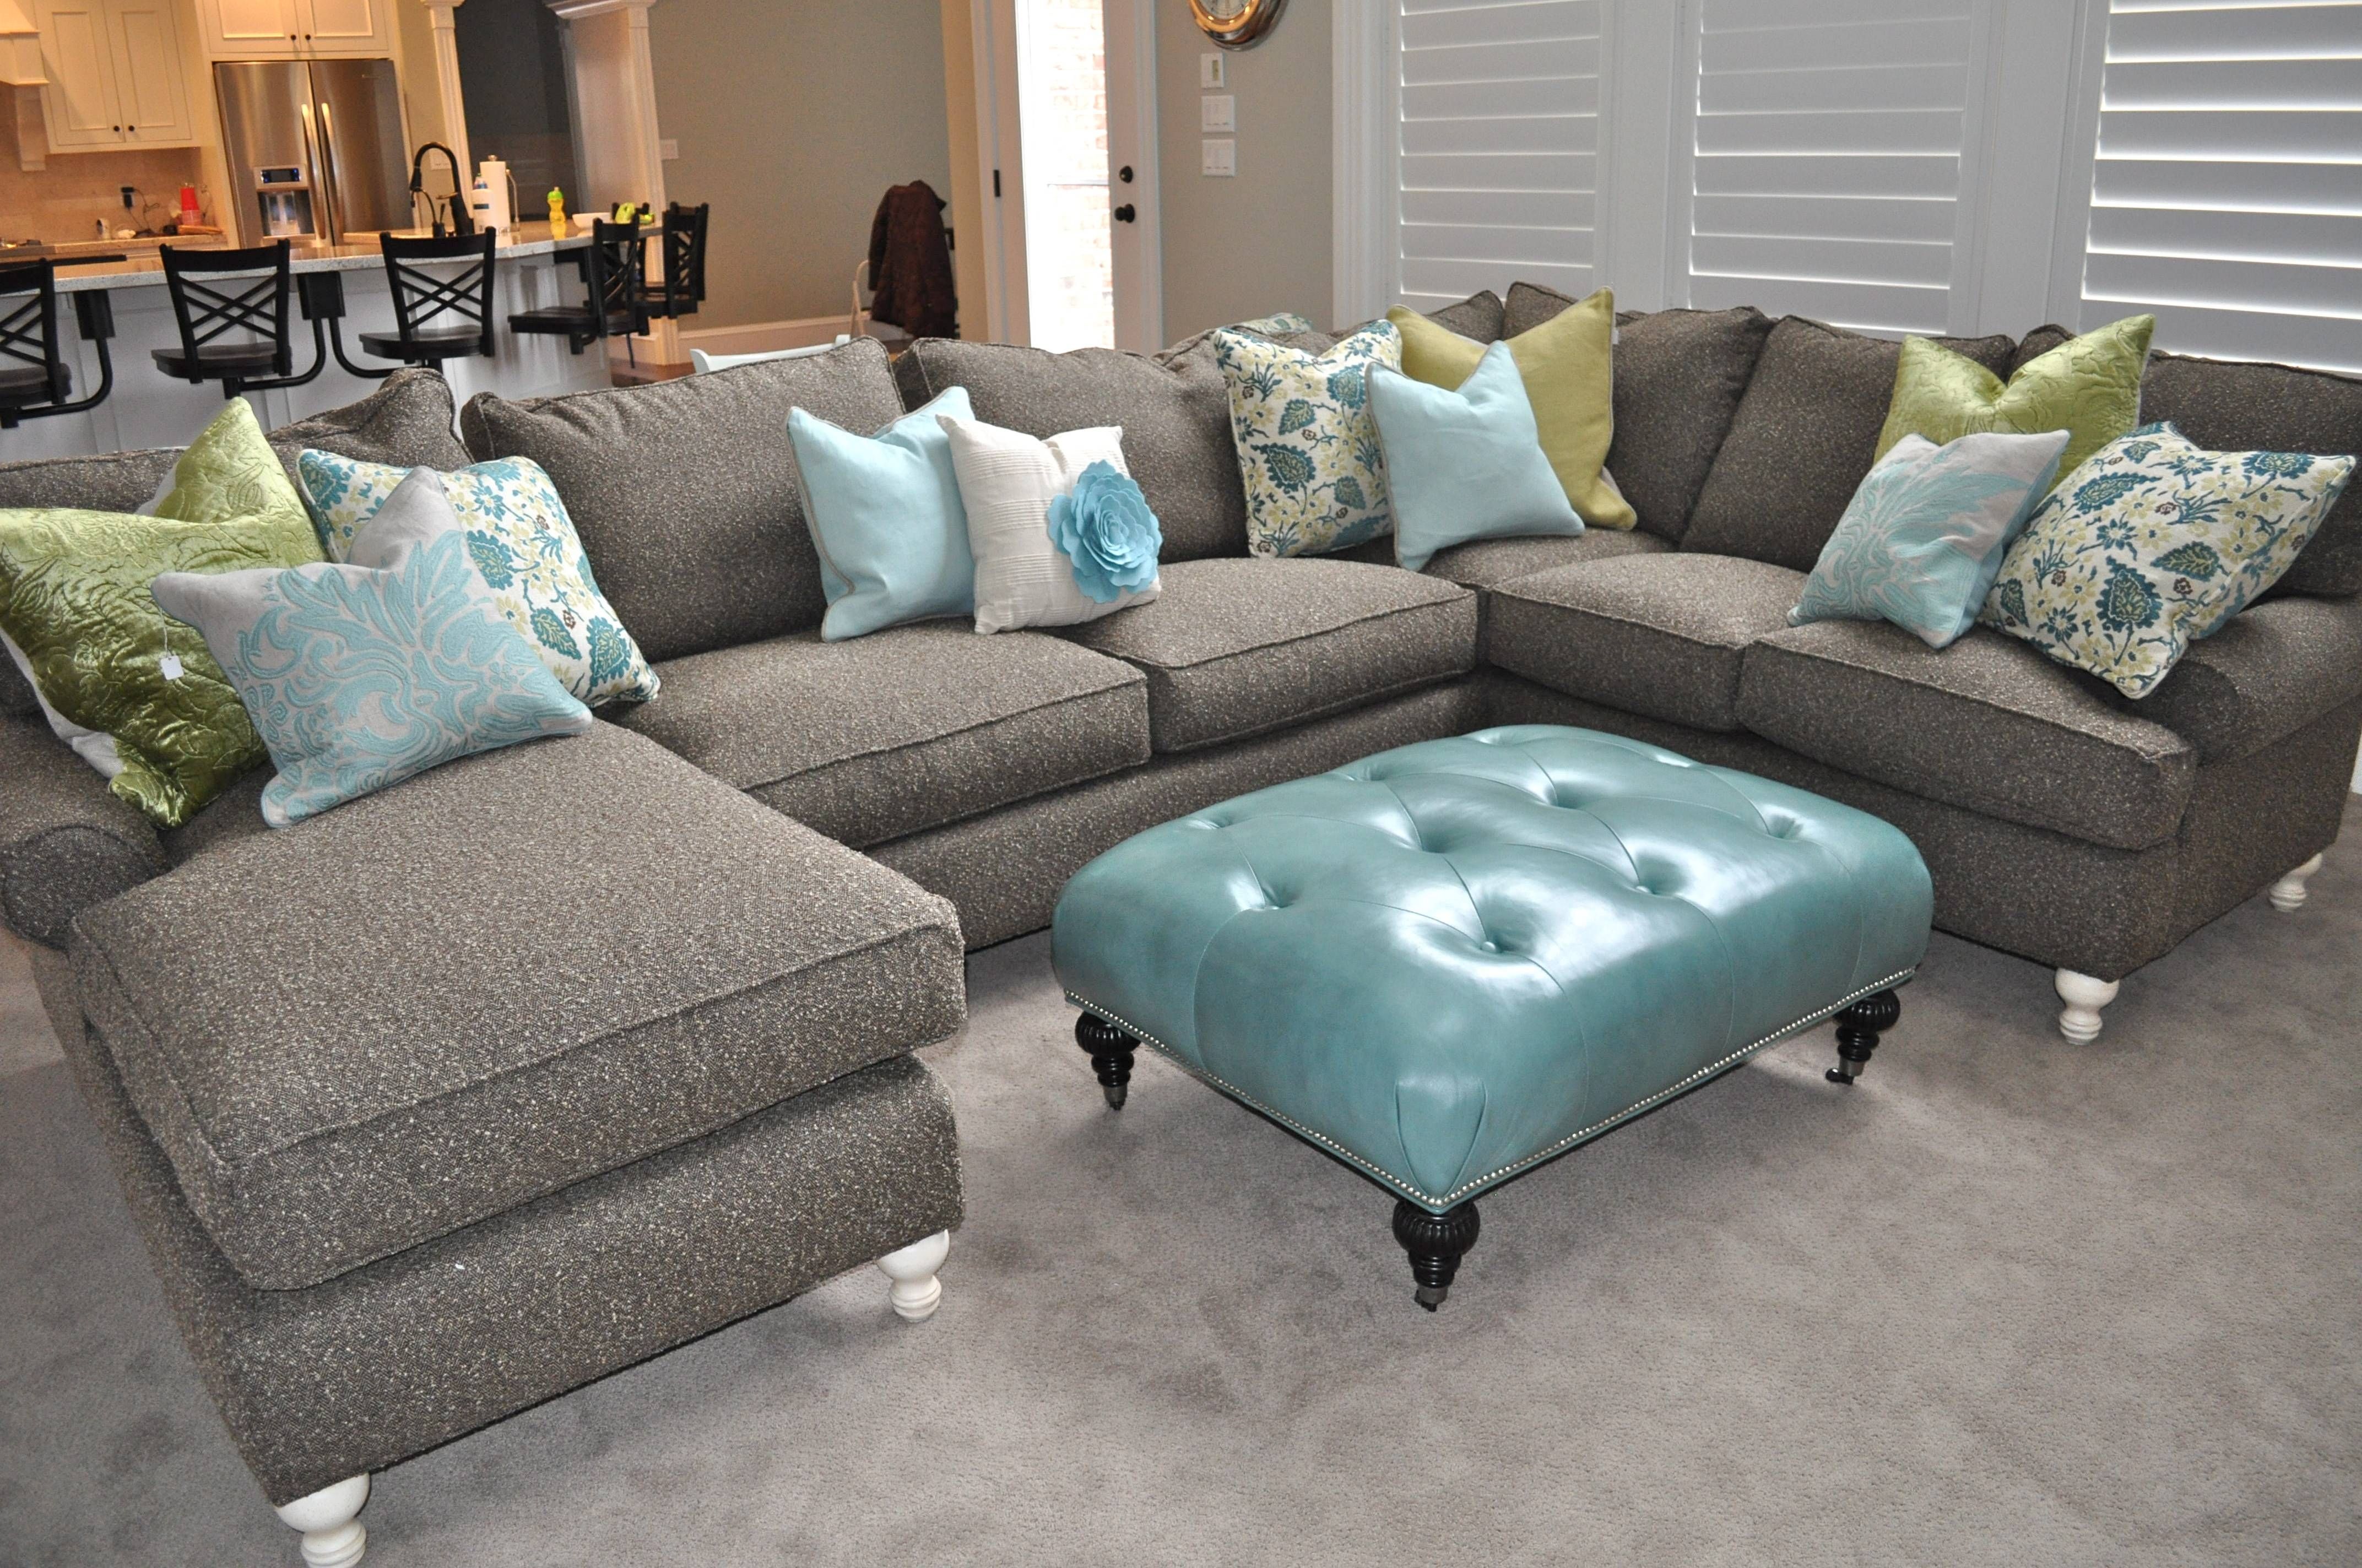 Beautiful Gray Tufted Sectional Sofa 55 About Remodel Down Feather Pertaining To Down Feather Sectional Sofa (View 29 of 30)